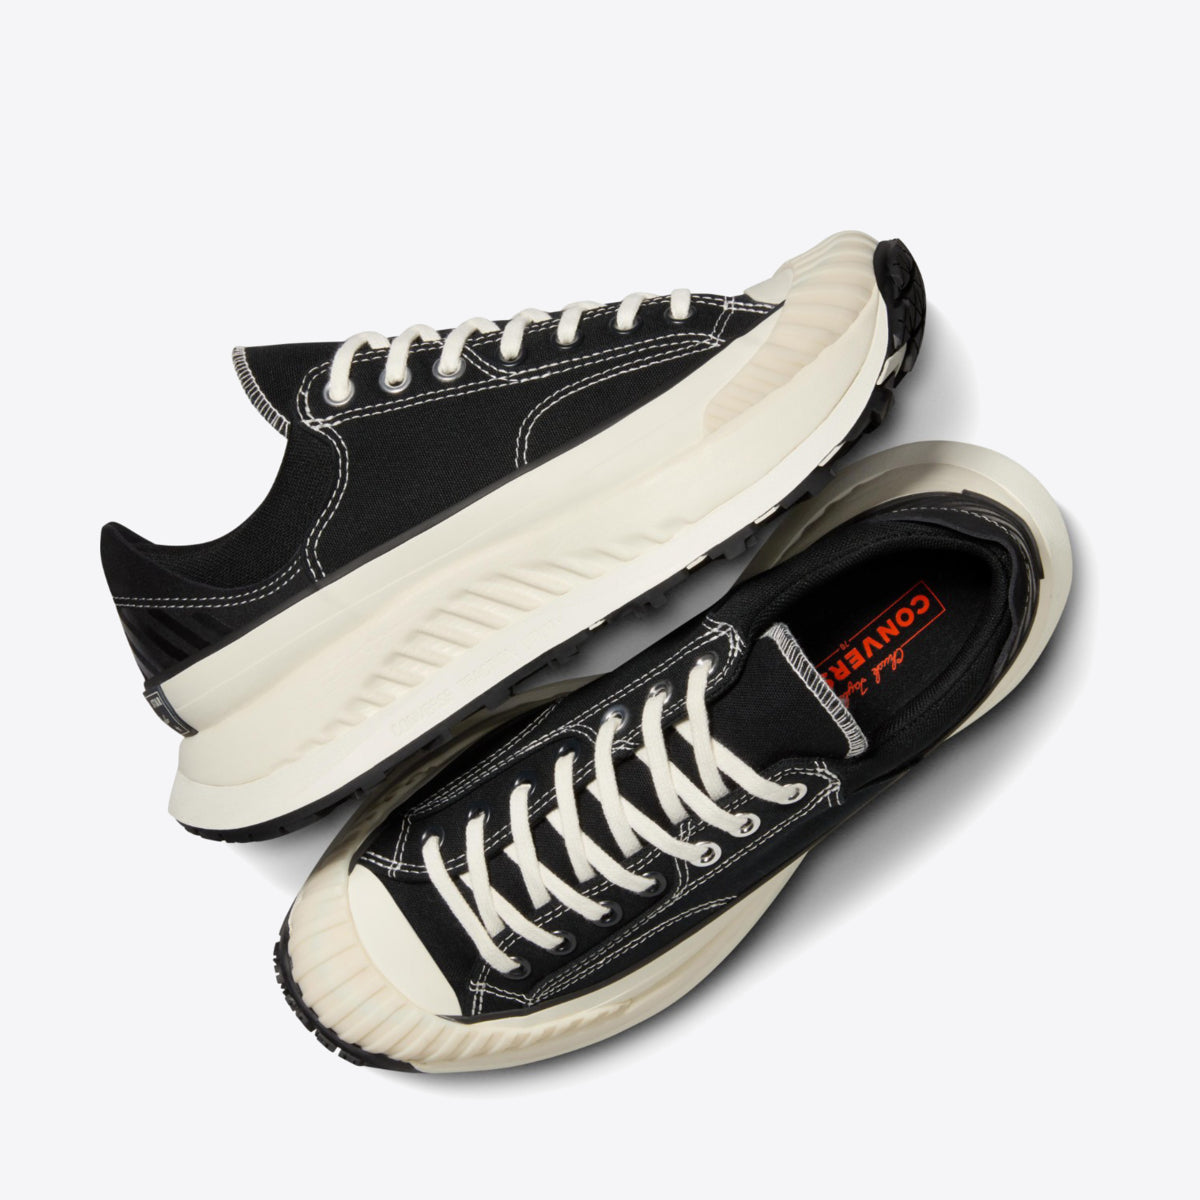 CONVERSE CT 70 AT Future Utility Low Black - Image 4